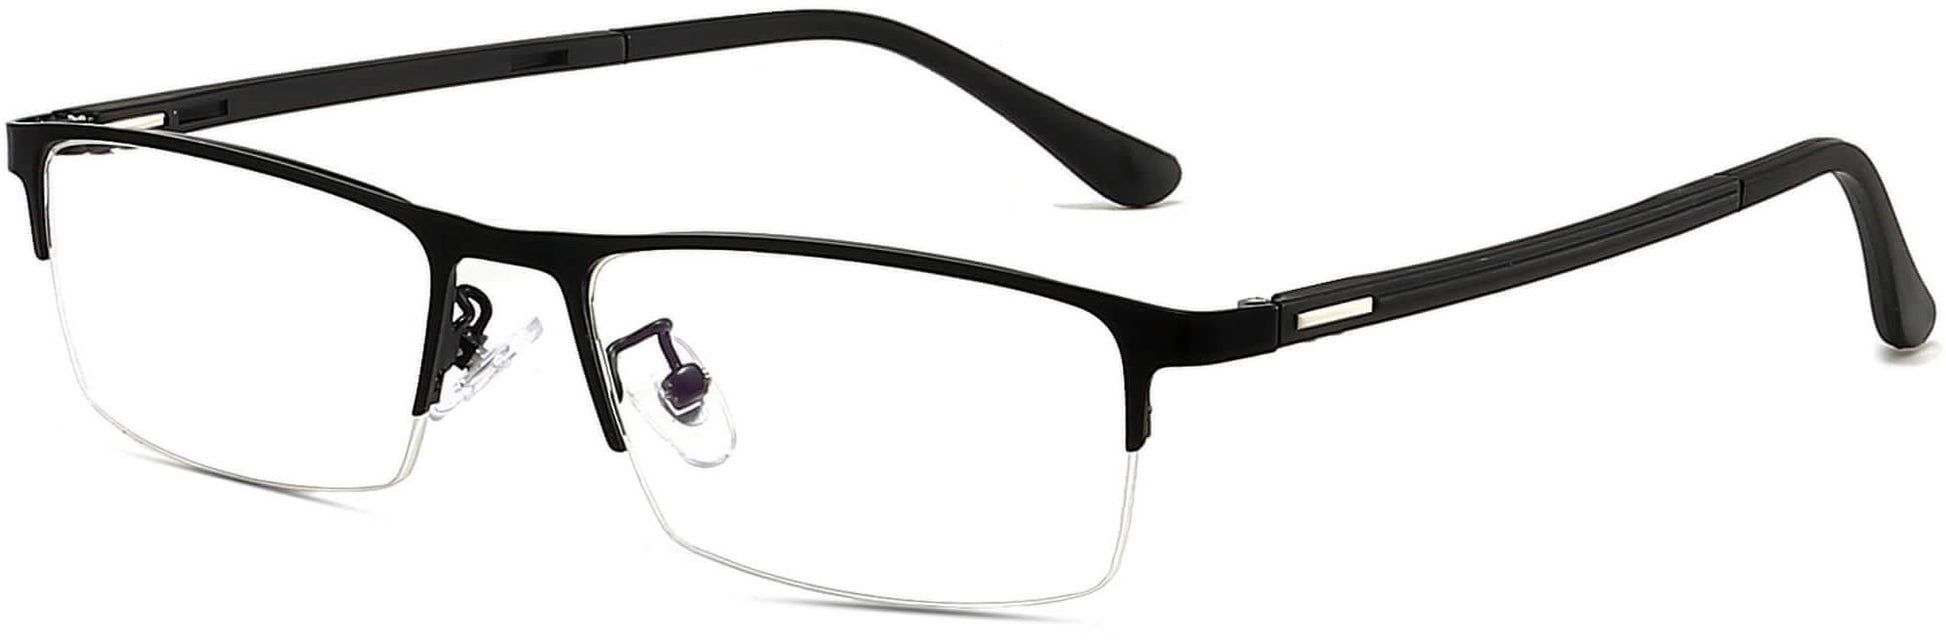 Levi Rectangle Black Eyeglasses from ANRRI, angle view